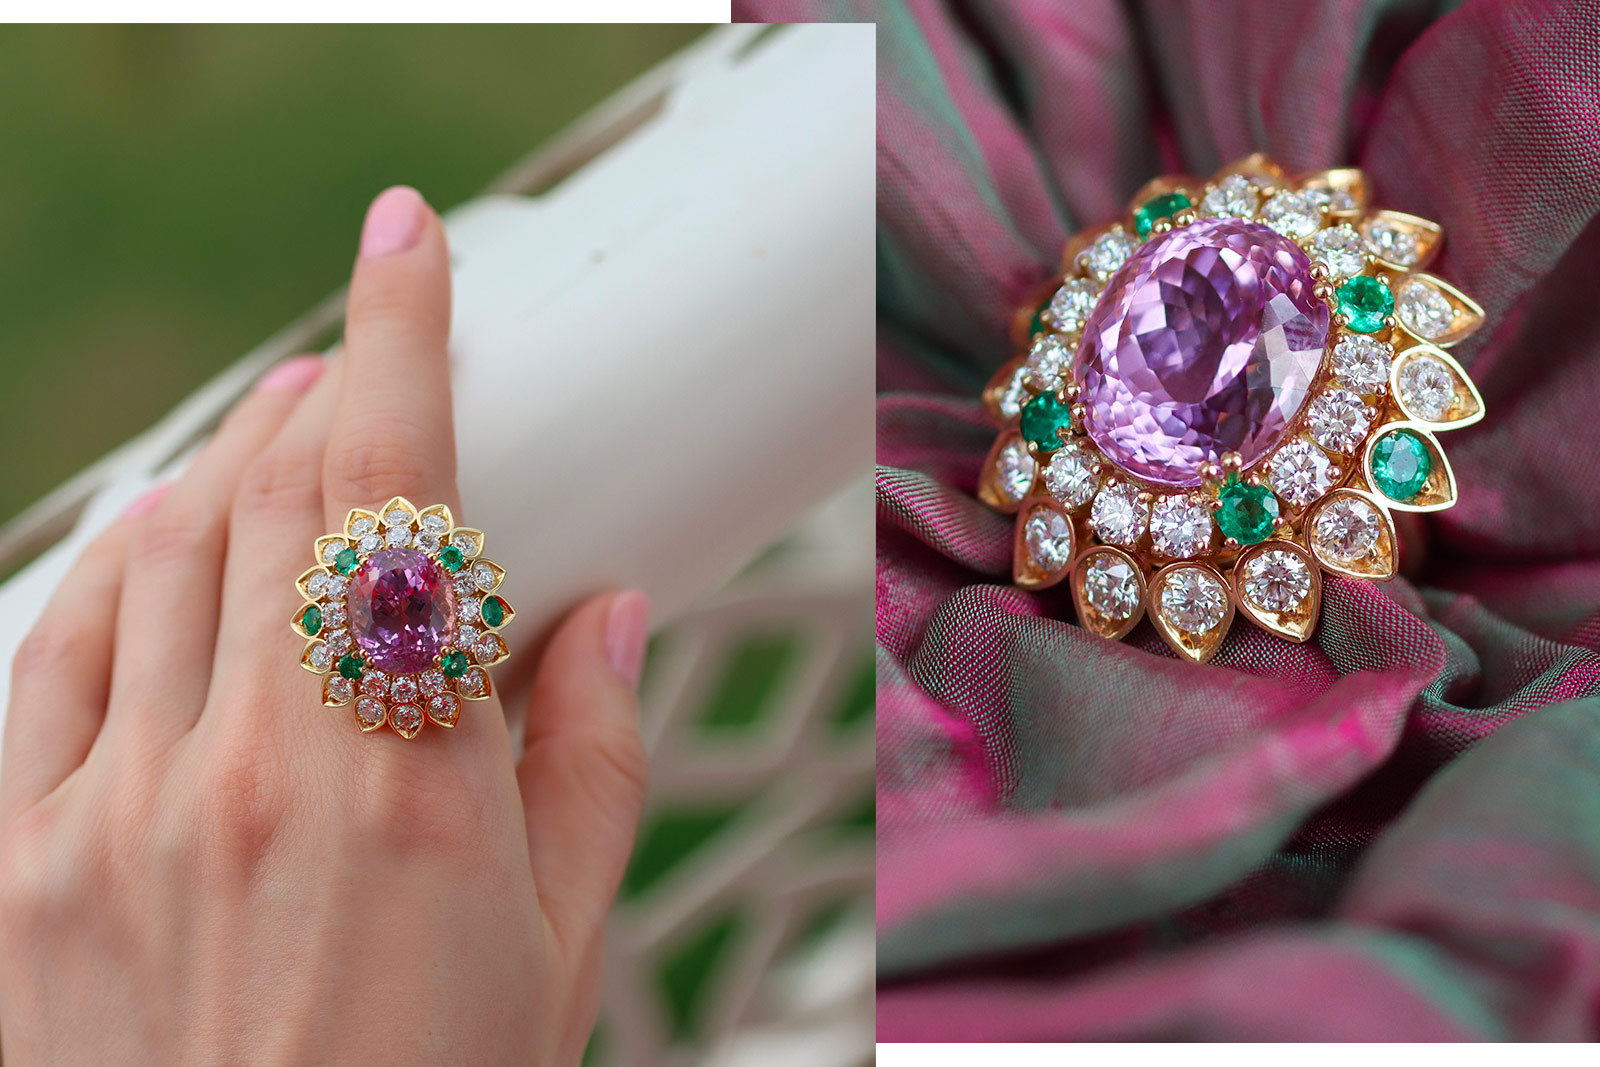 Veschetti cocktail ring with a striking green and pink combination of gemstones, accented with diamonds